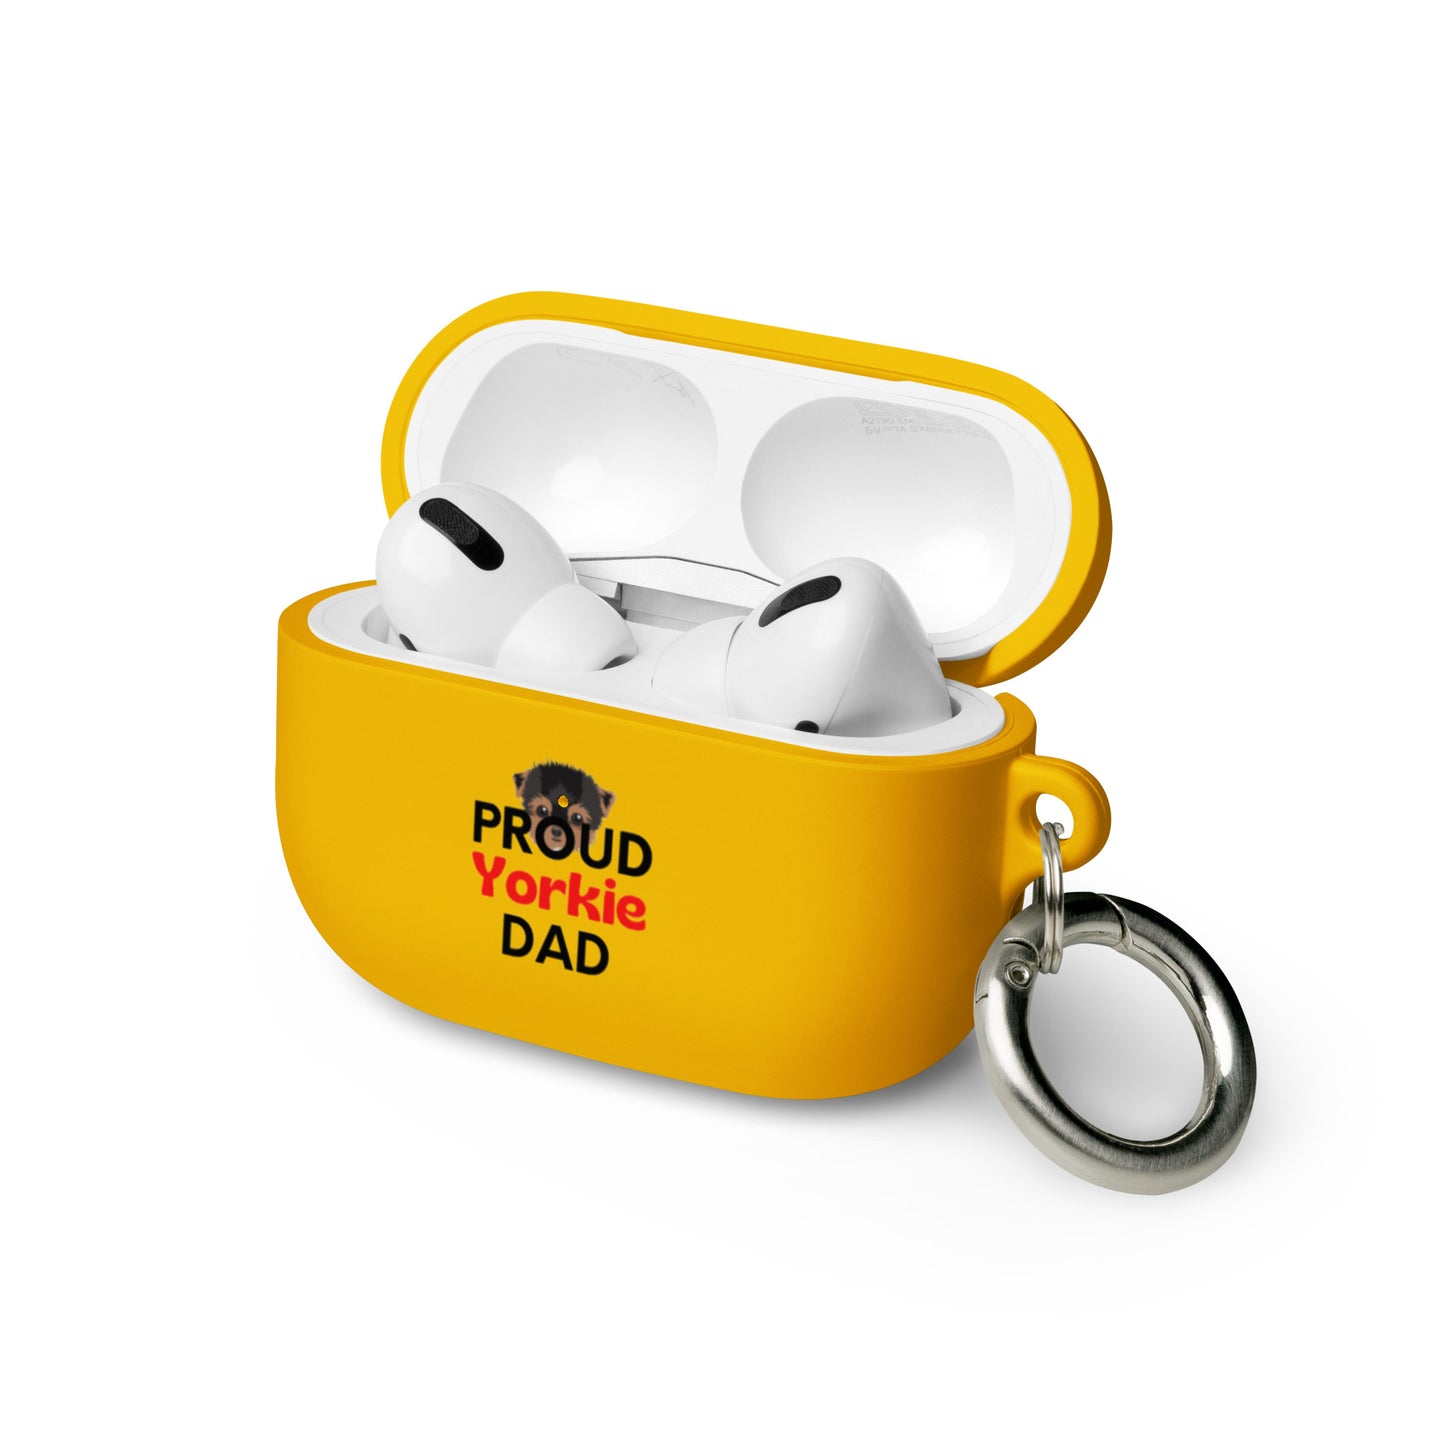 AirPods case 'PROUD Yorkie DAD'